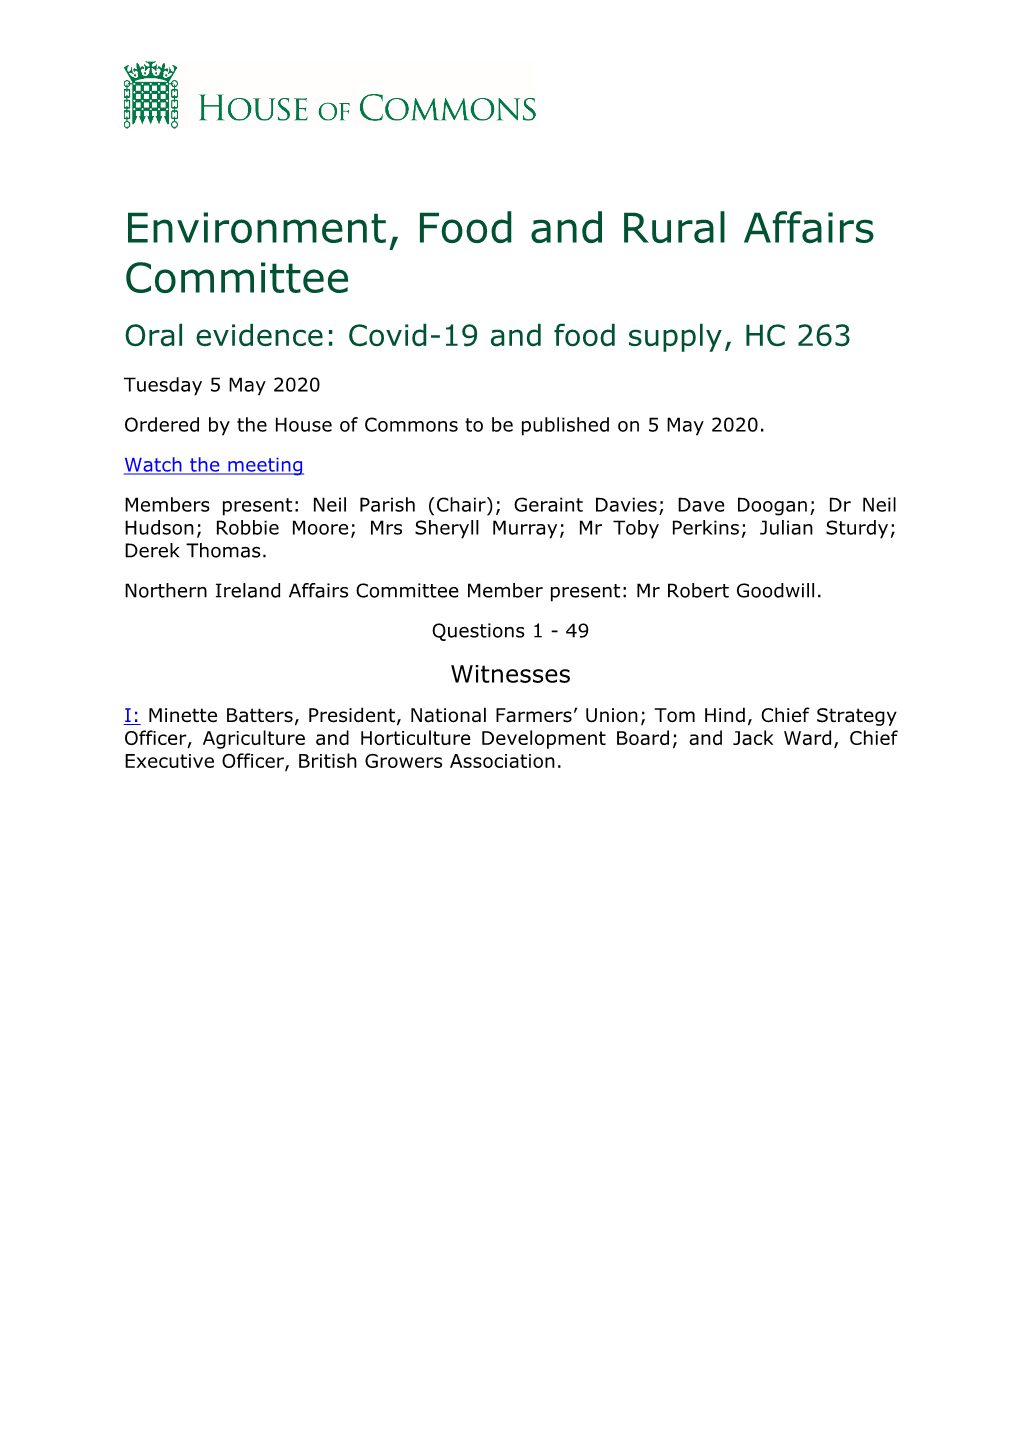 Environment, Food and Rural Affairs Committee Oral Evidence: Covid-19 and Food Supply, HC 263